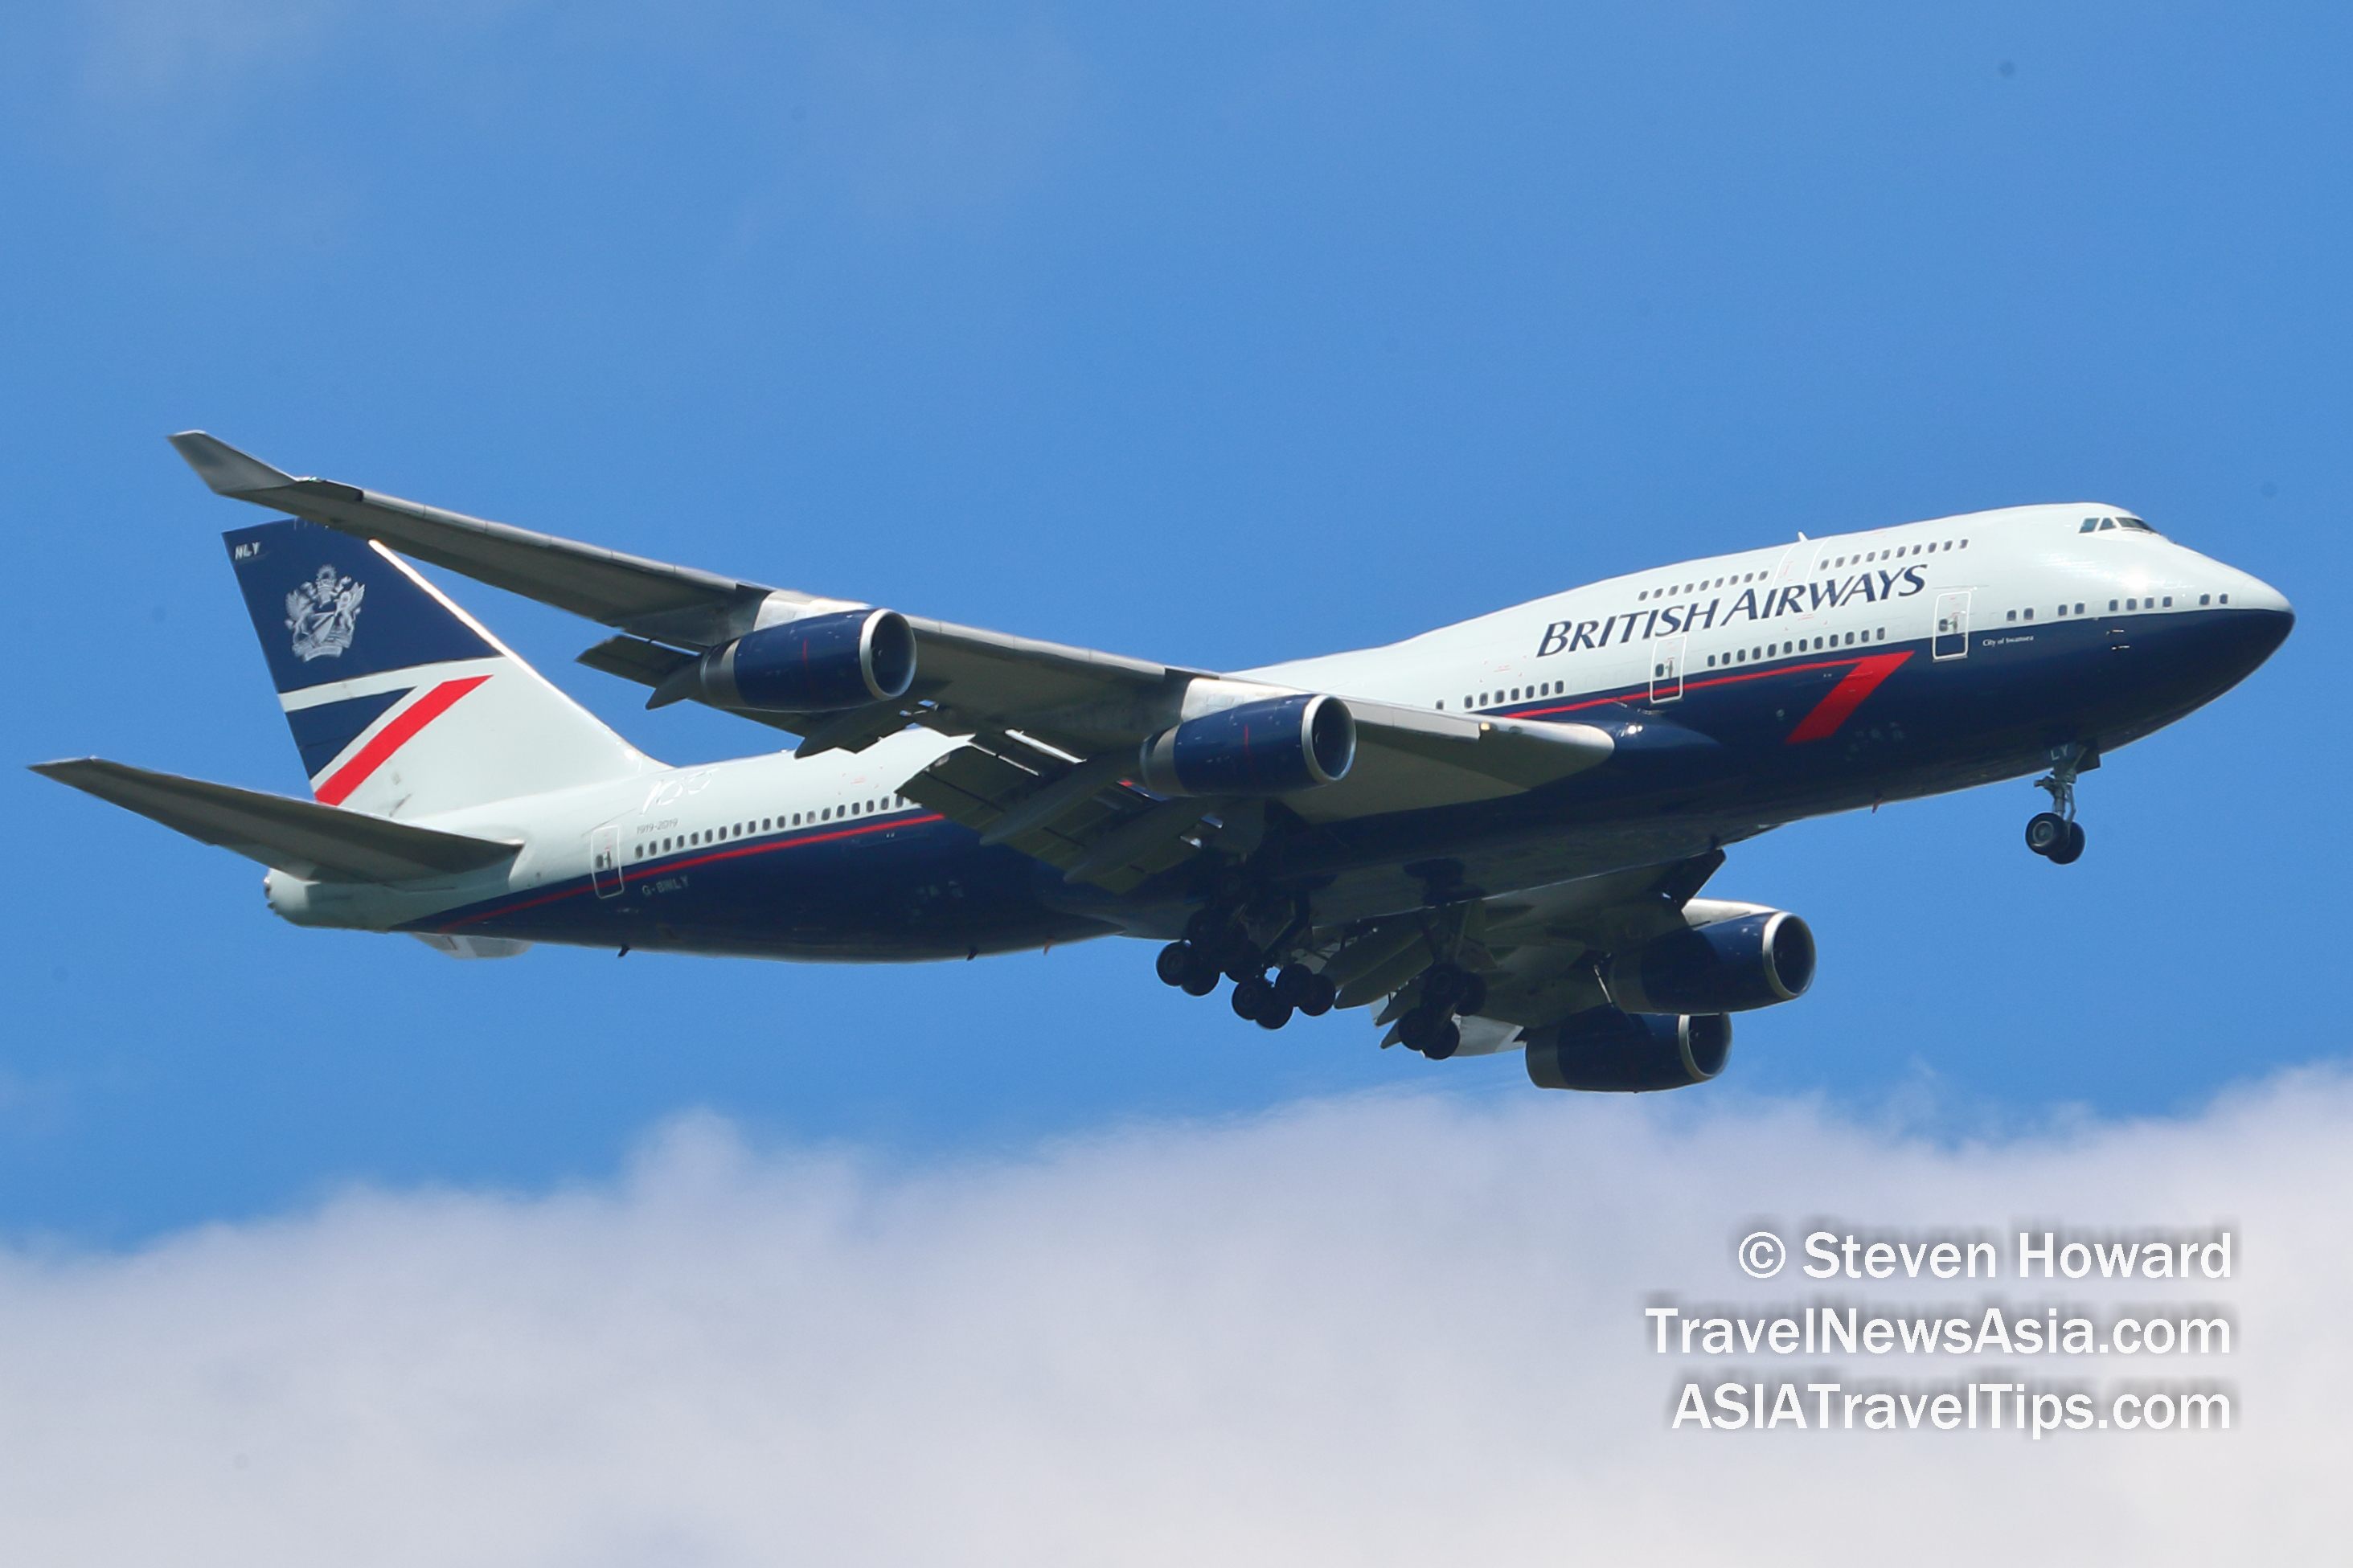 British Airways Boeing 747 reg: G-BNLY painted in the Landor livery used by BA on its aircraft between 1984 and 1997. Picture by Steven Howard of TravelNewsAsia.com on 3 July 2019. Click to enlarge.